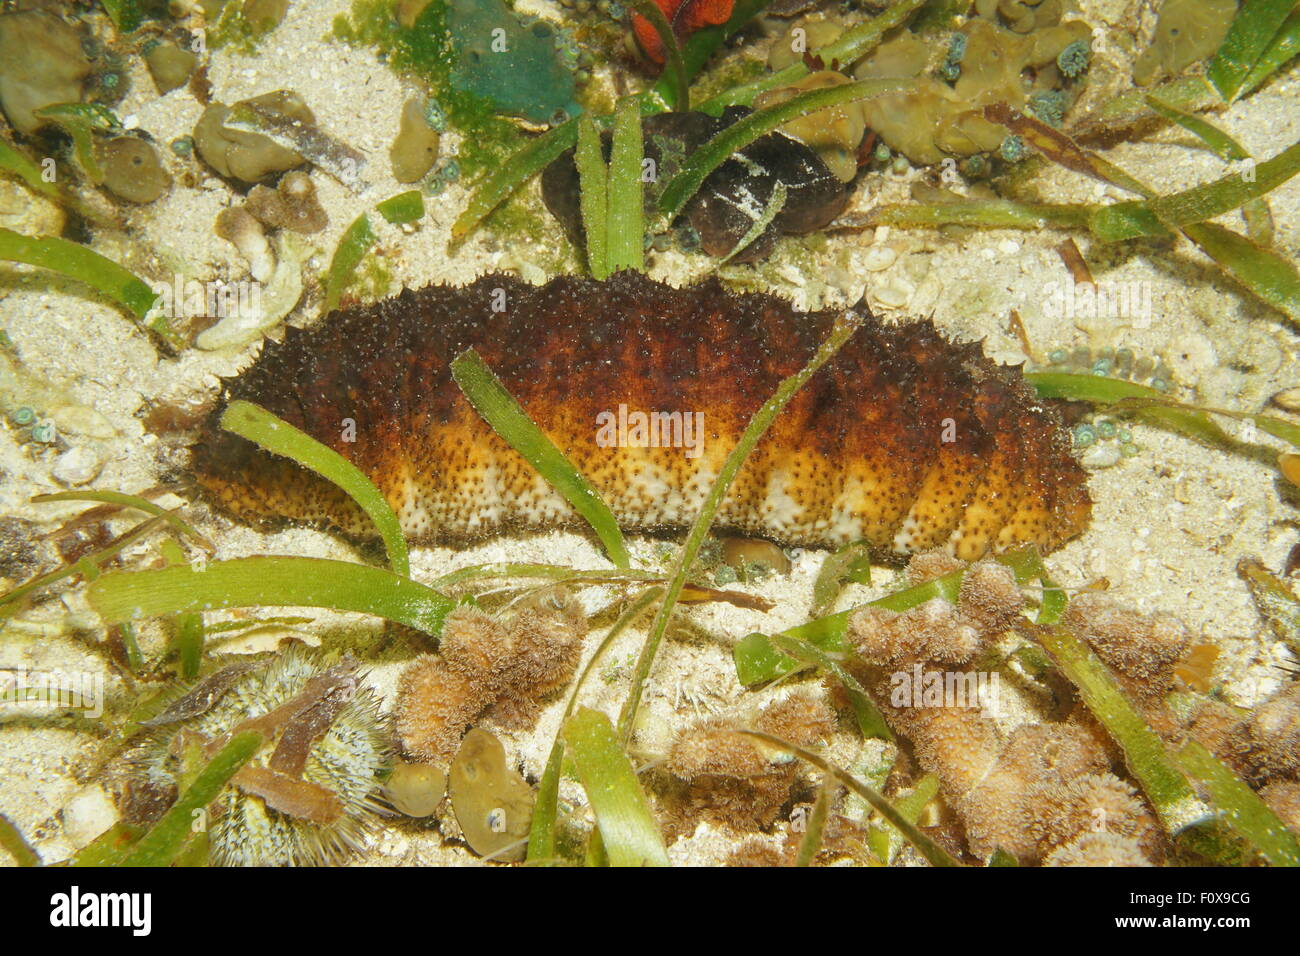 Donkey dung sea cucumber, Holothuria mexicana, underwater on the seabed of the Caribbean sea Stock Photo